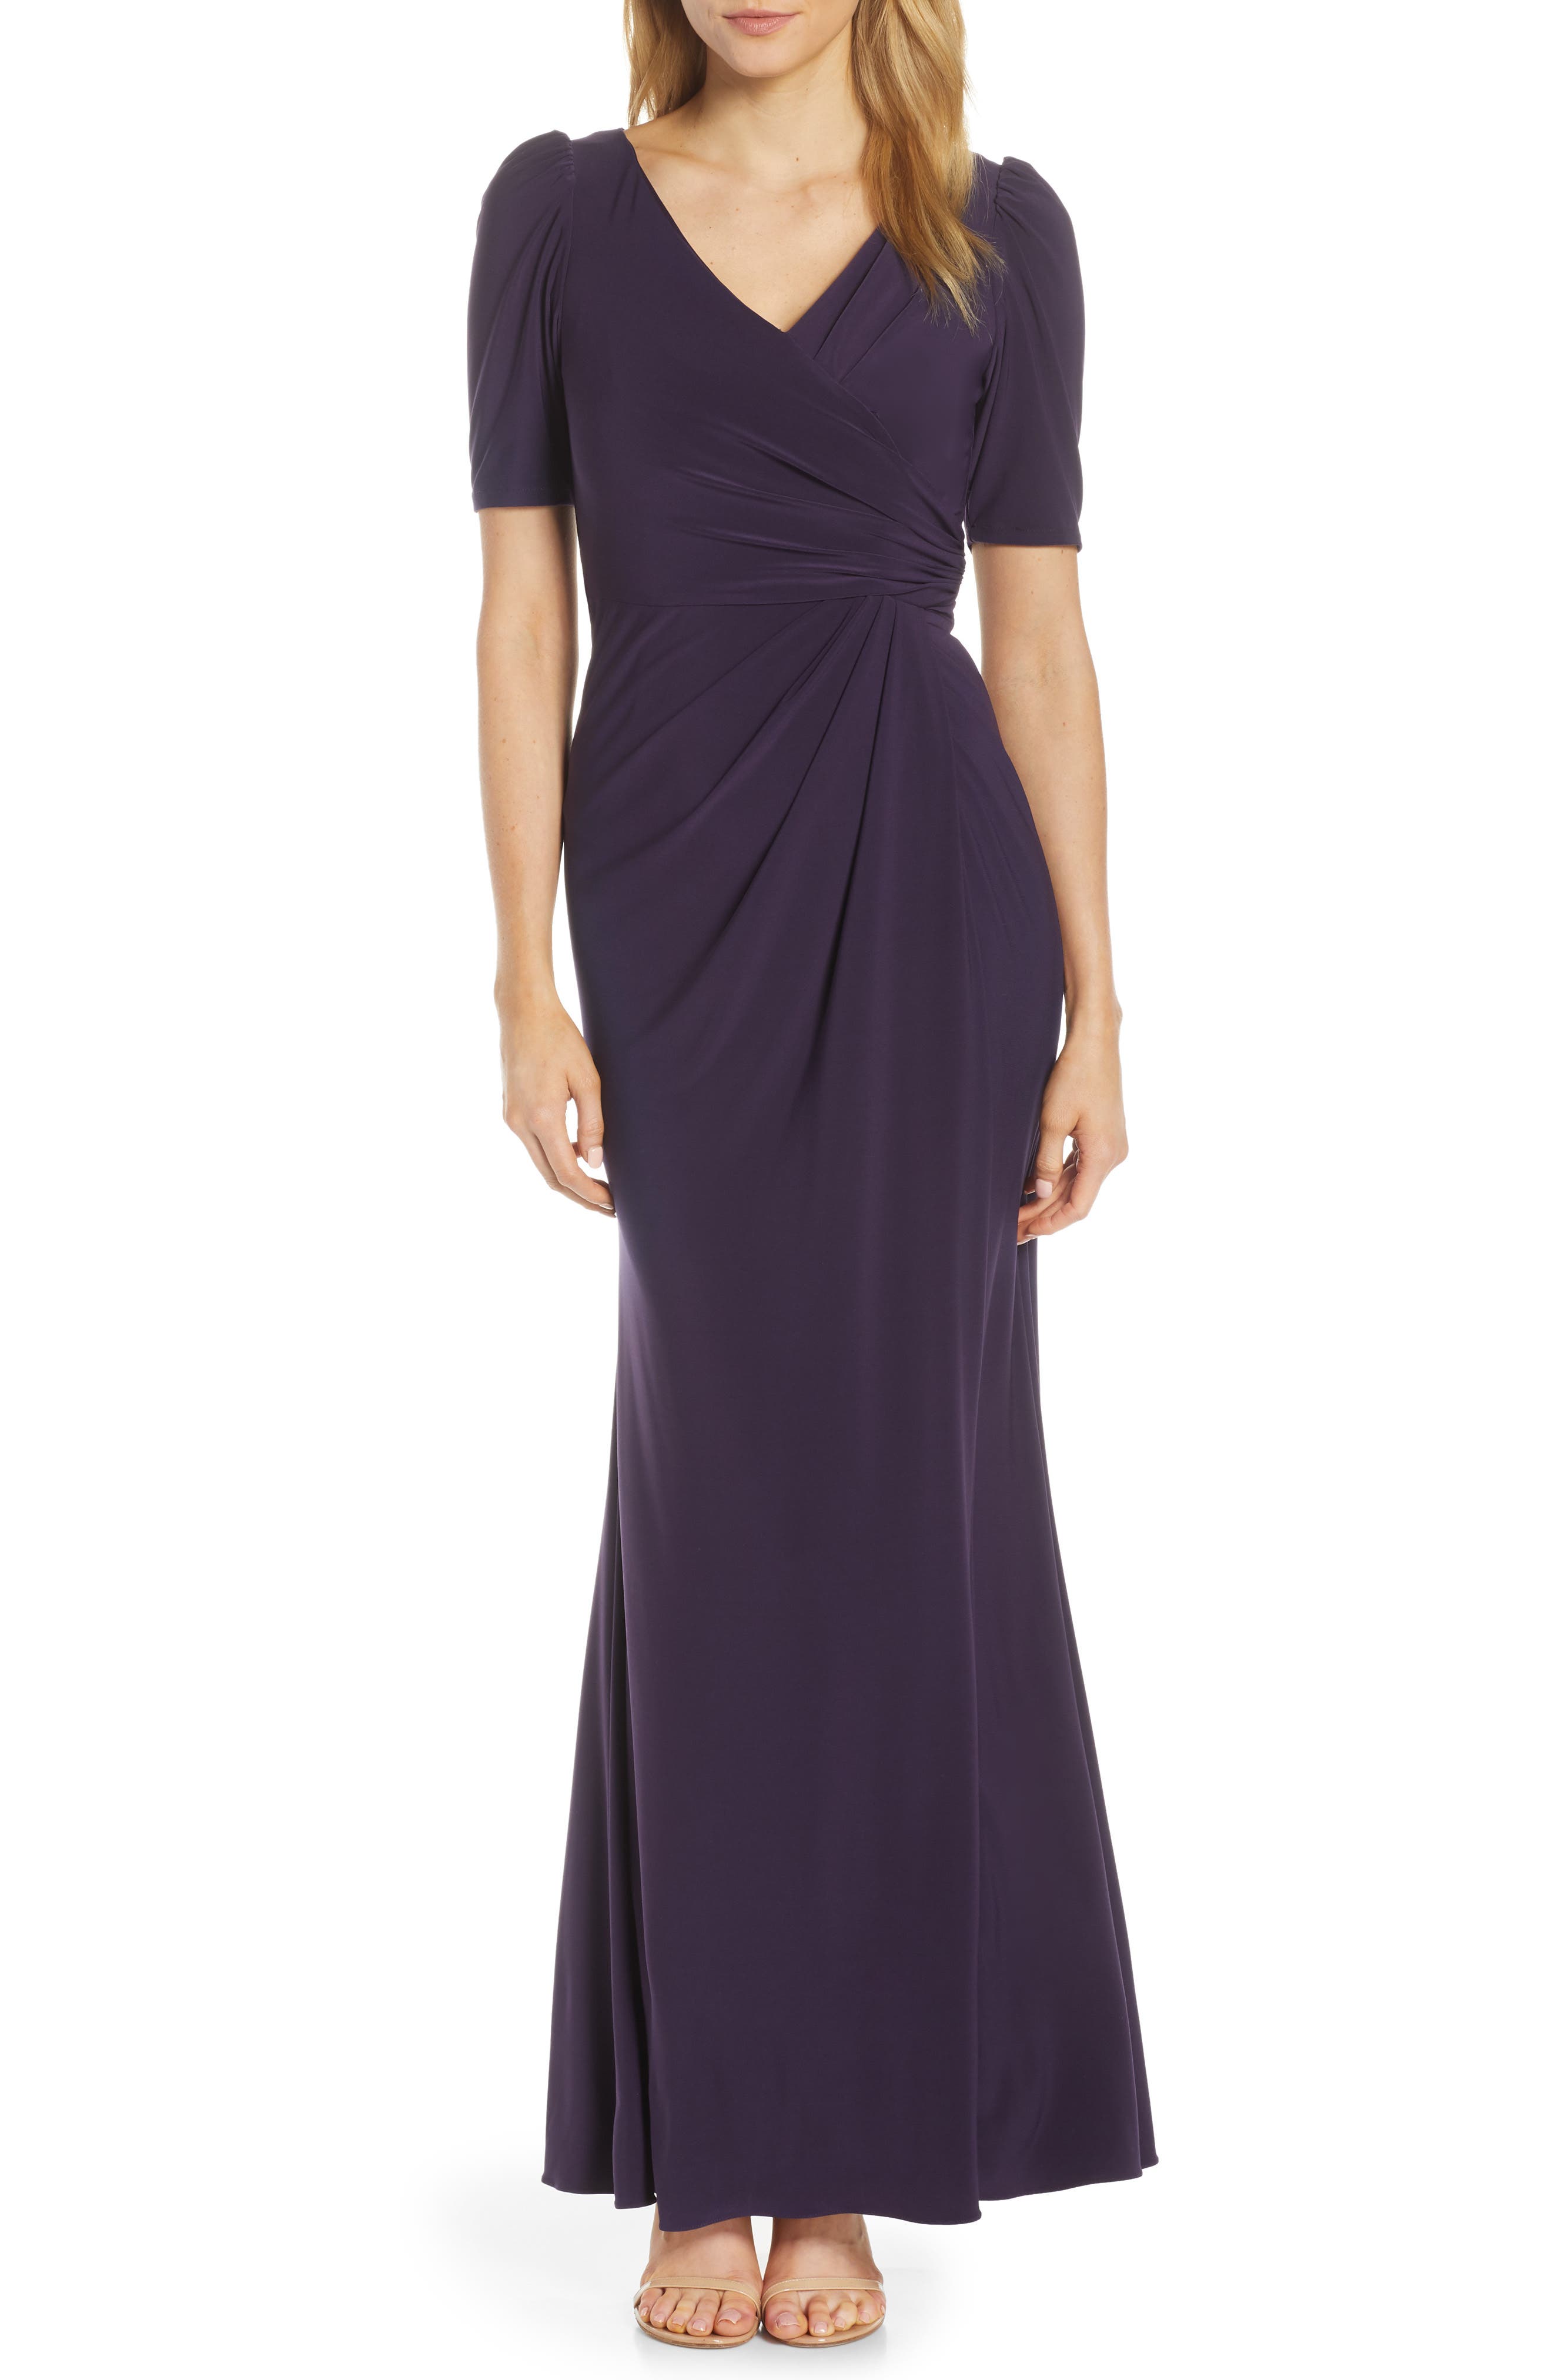 adrianna papell jersey gown